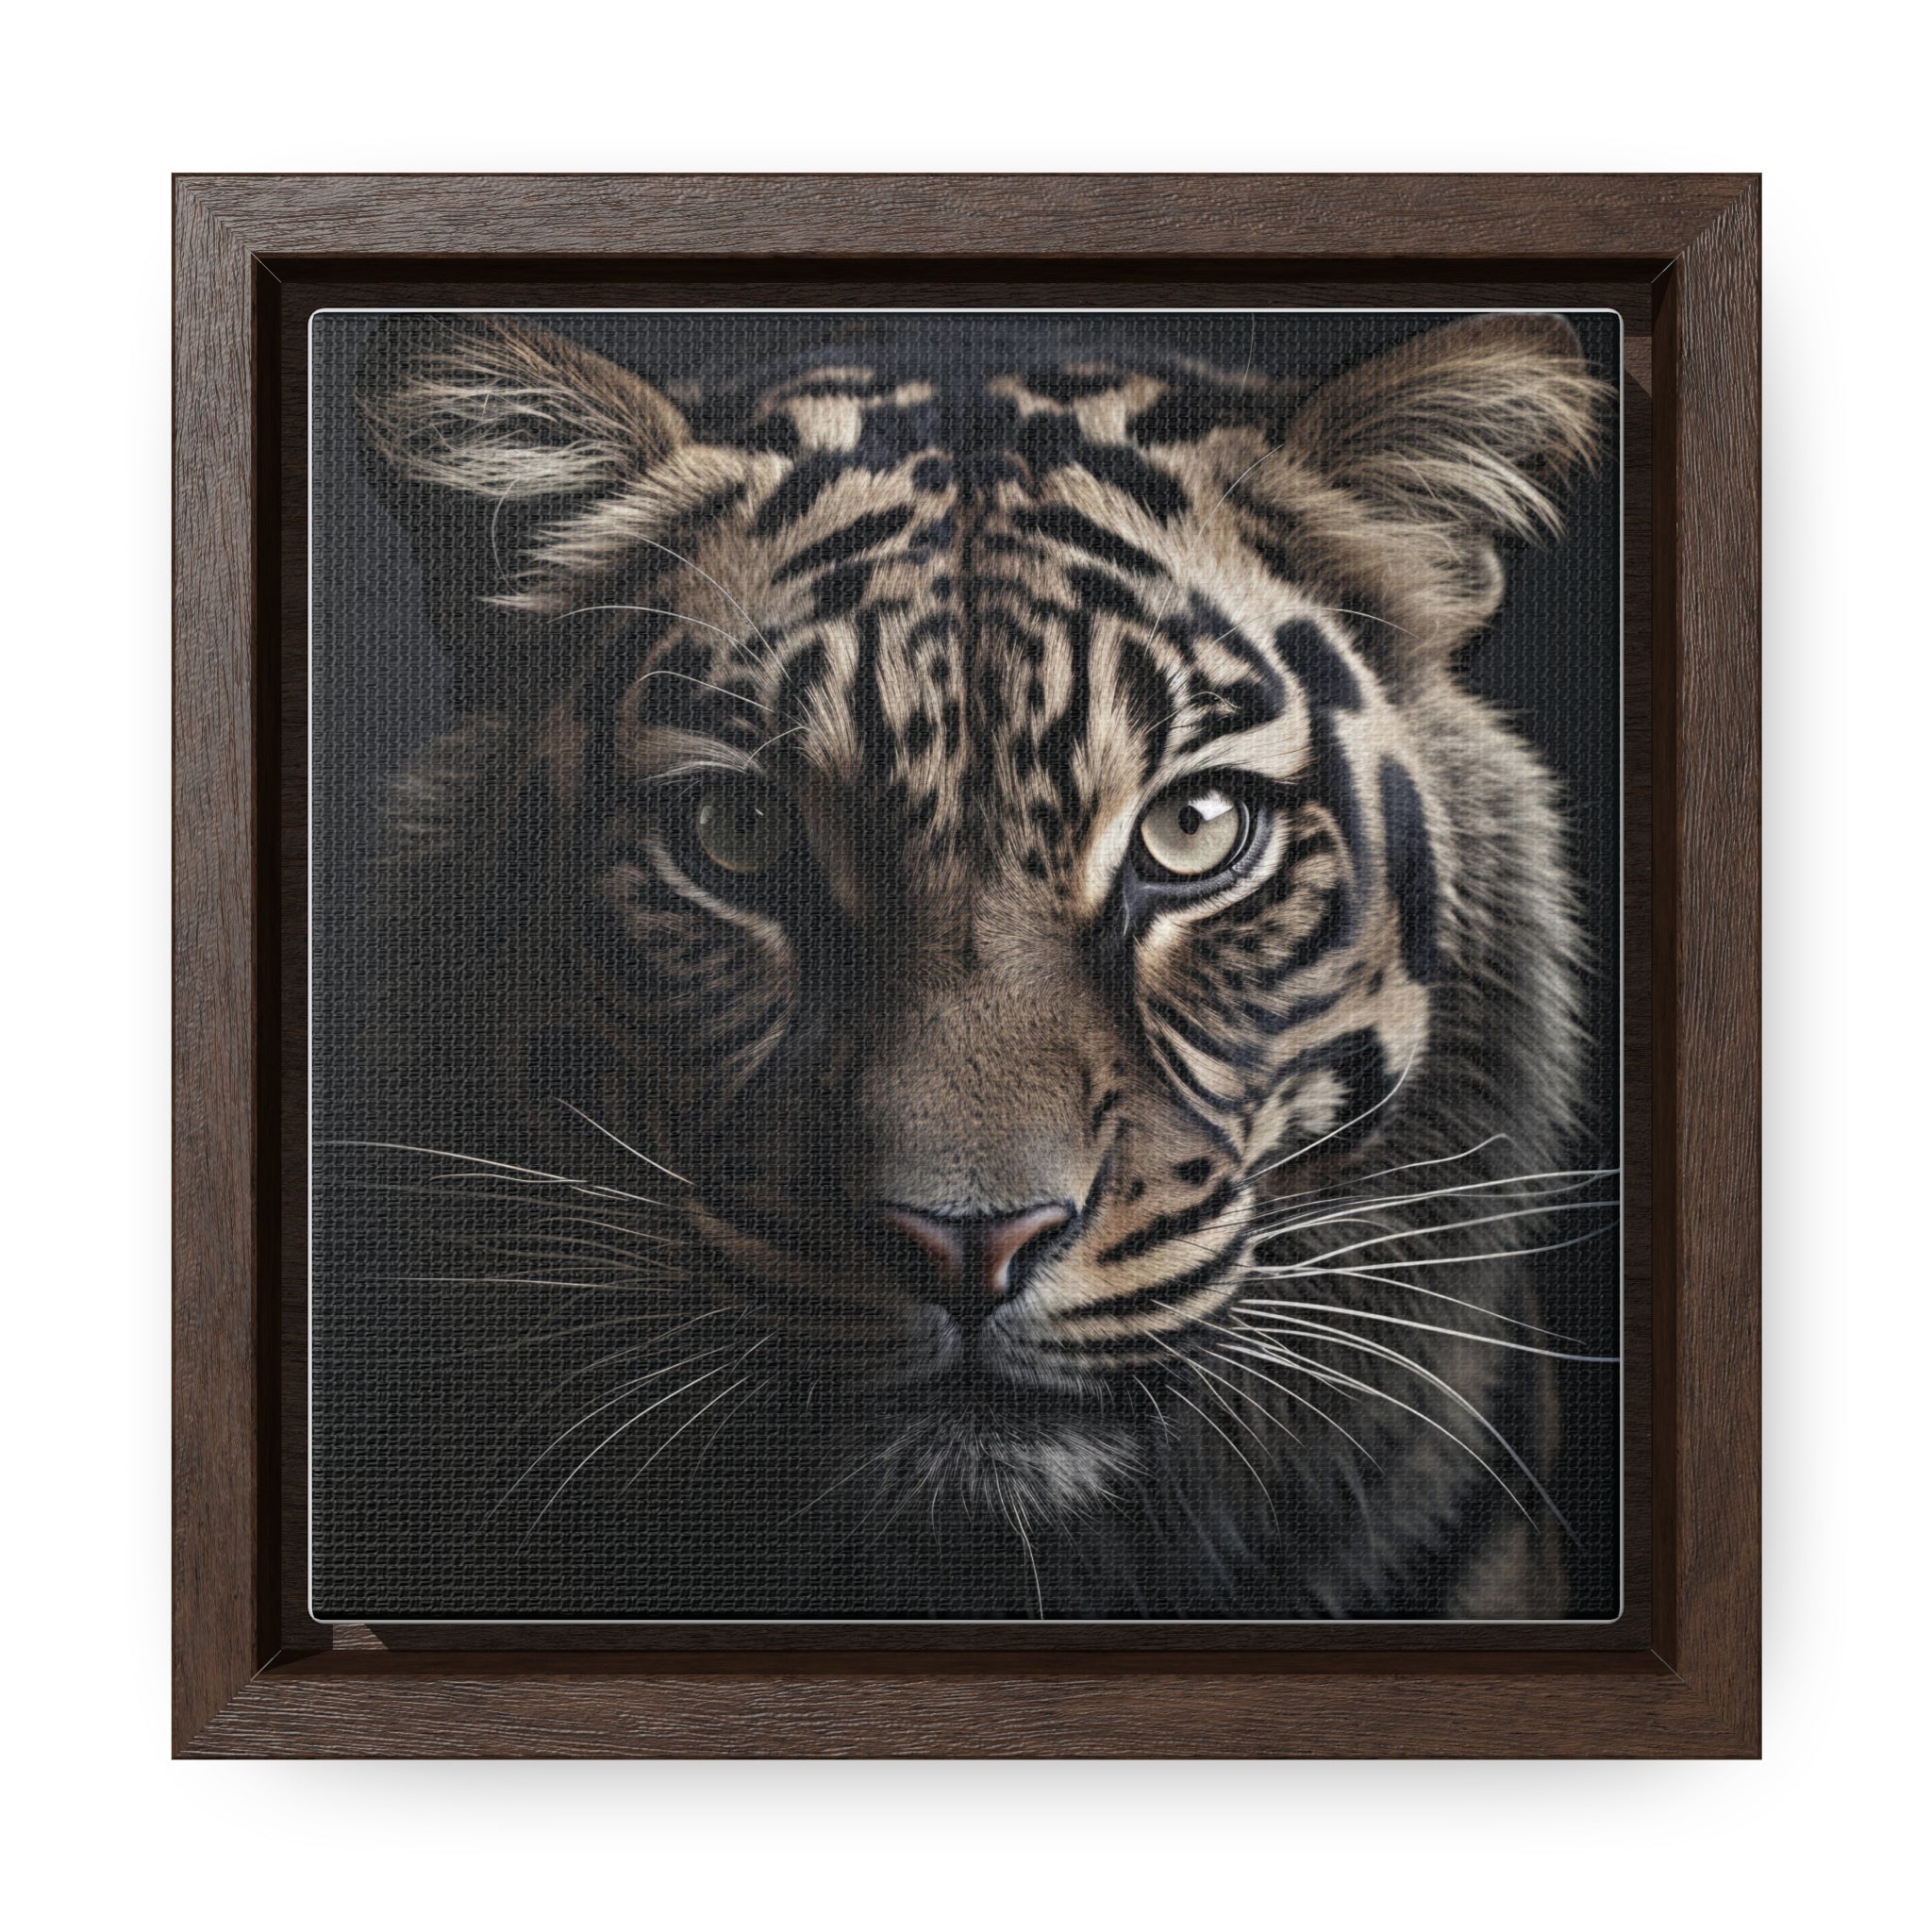 Bengal tiger | 2121Gallery Canvas Wraps, Square Frame